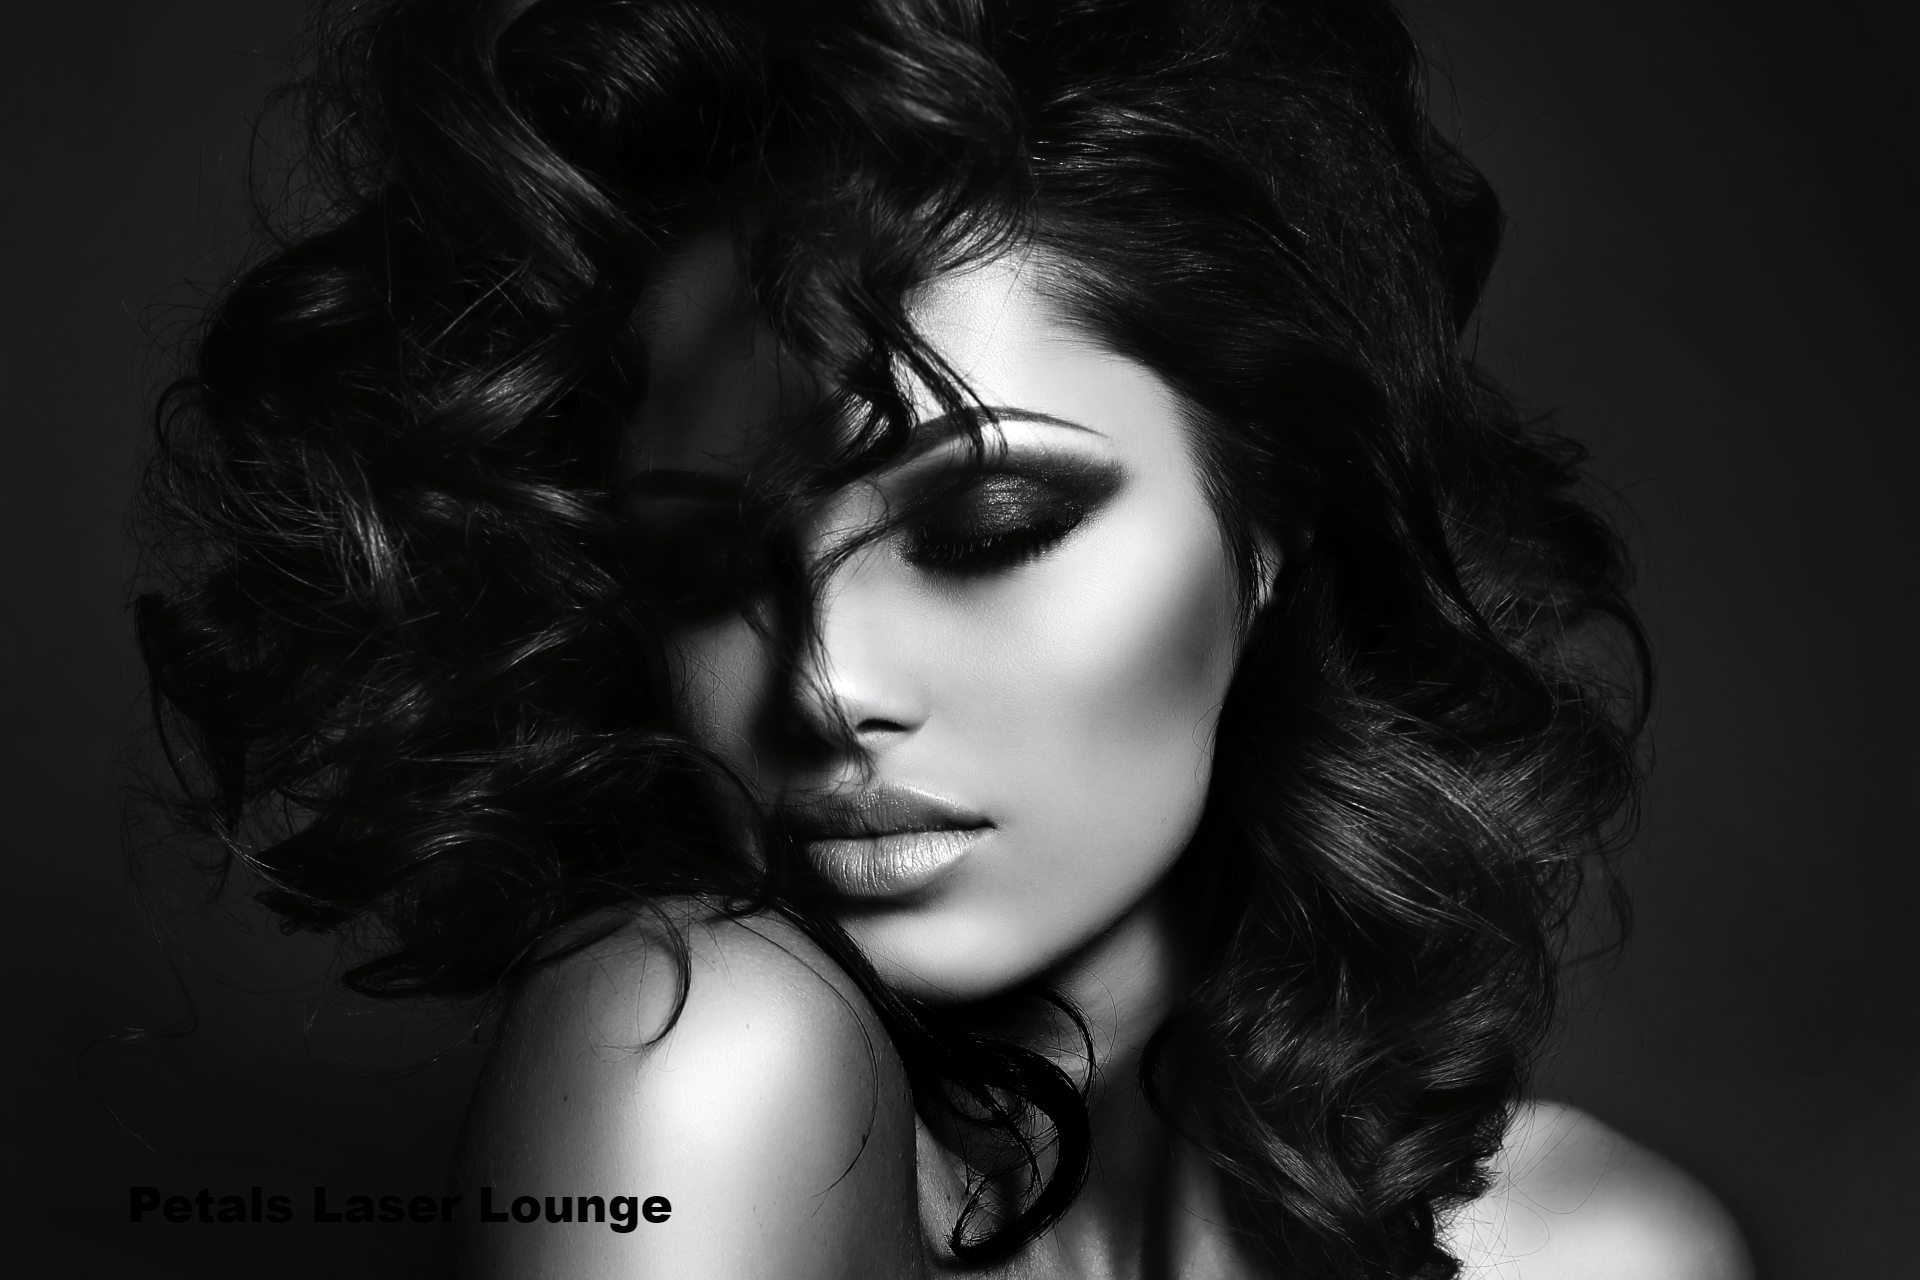 Petals Laser Lounge - From $50 - New York, NY